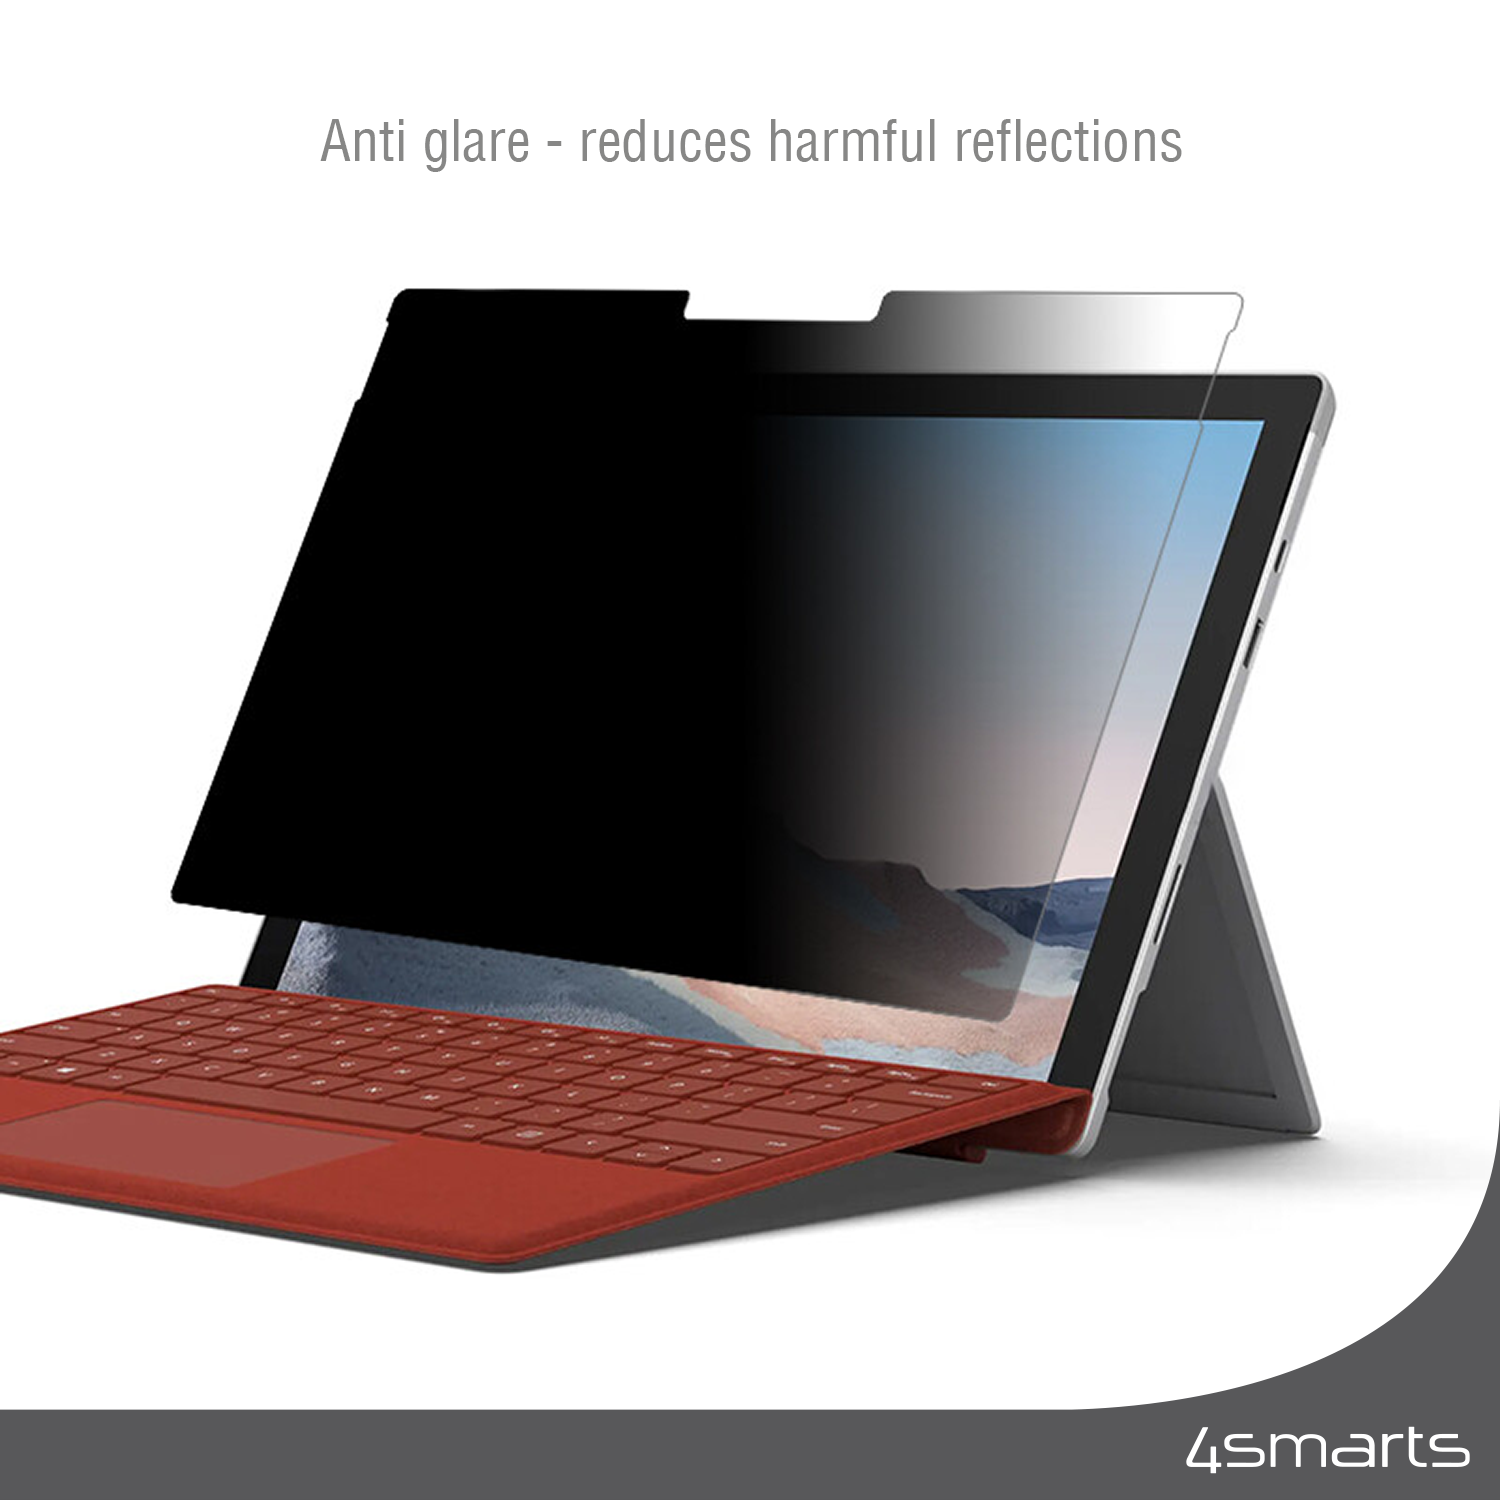 With 4smarts privacy screen protection your Microsoft Surface Laptop display is also effectively protected from scratches and smudges.